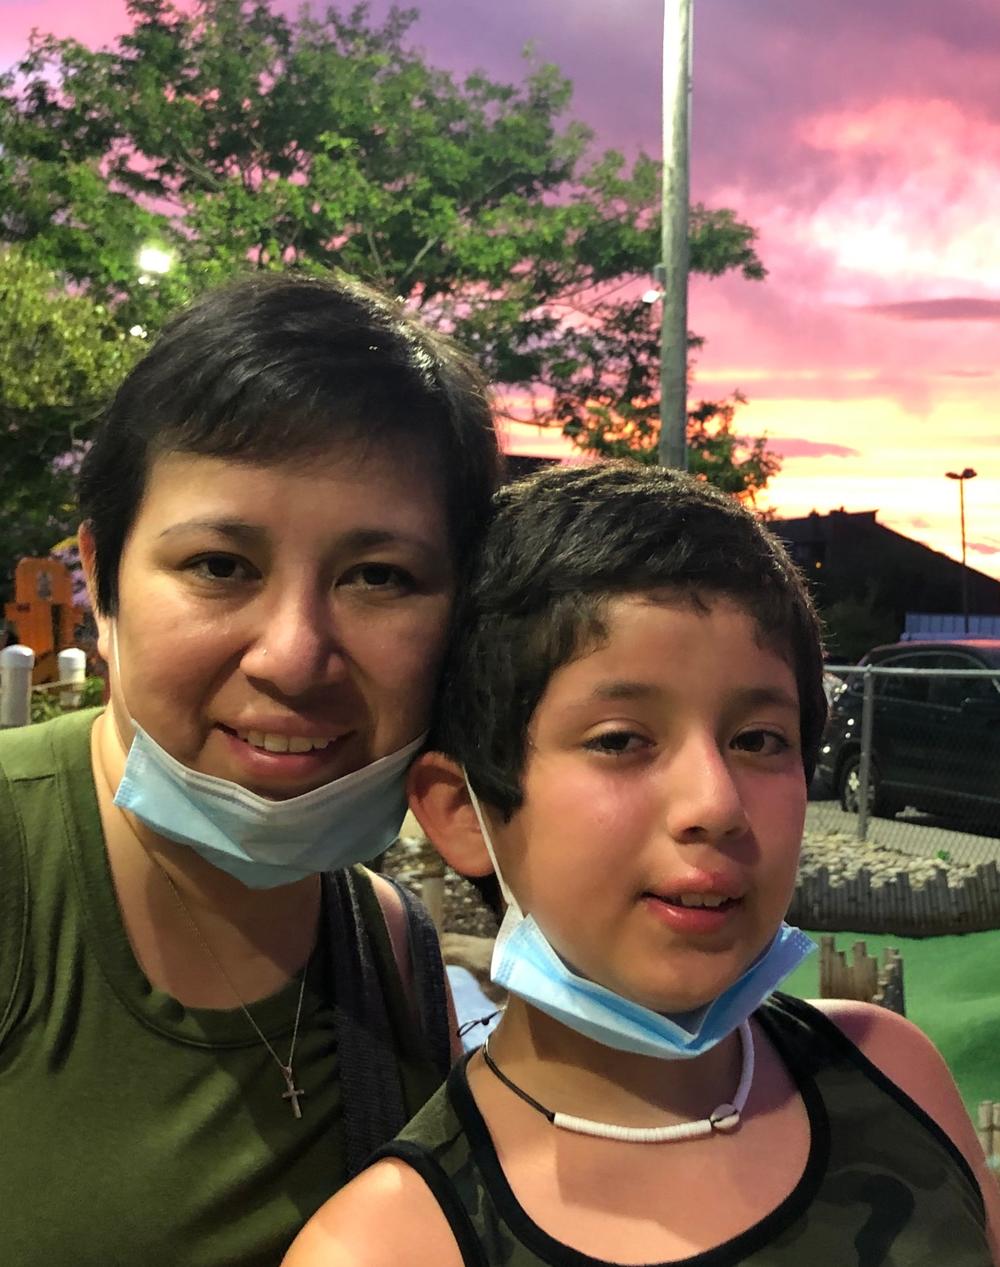 Roxana Guerra, who has metastatic breast cancer, has been trying to avoid large crowds this summer, while working and taking care of her 11-year-old son, Enrique.